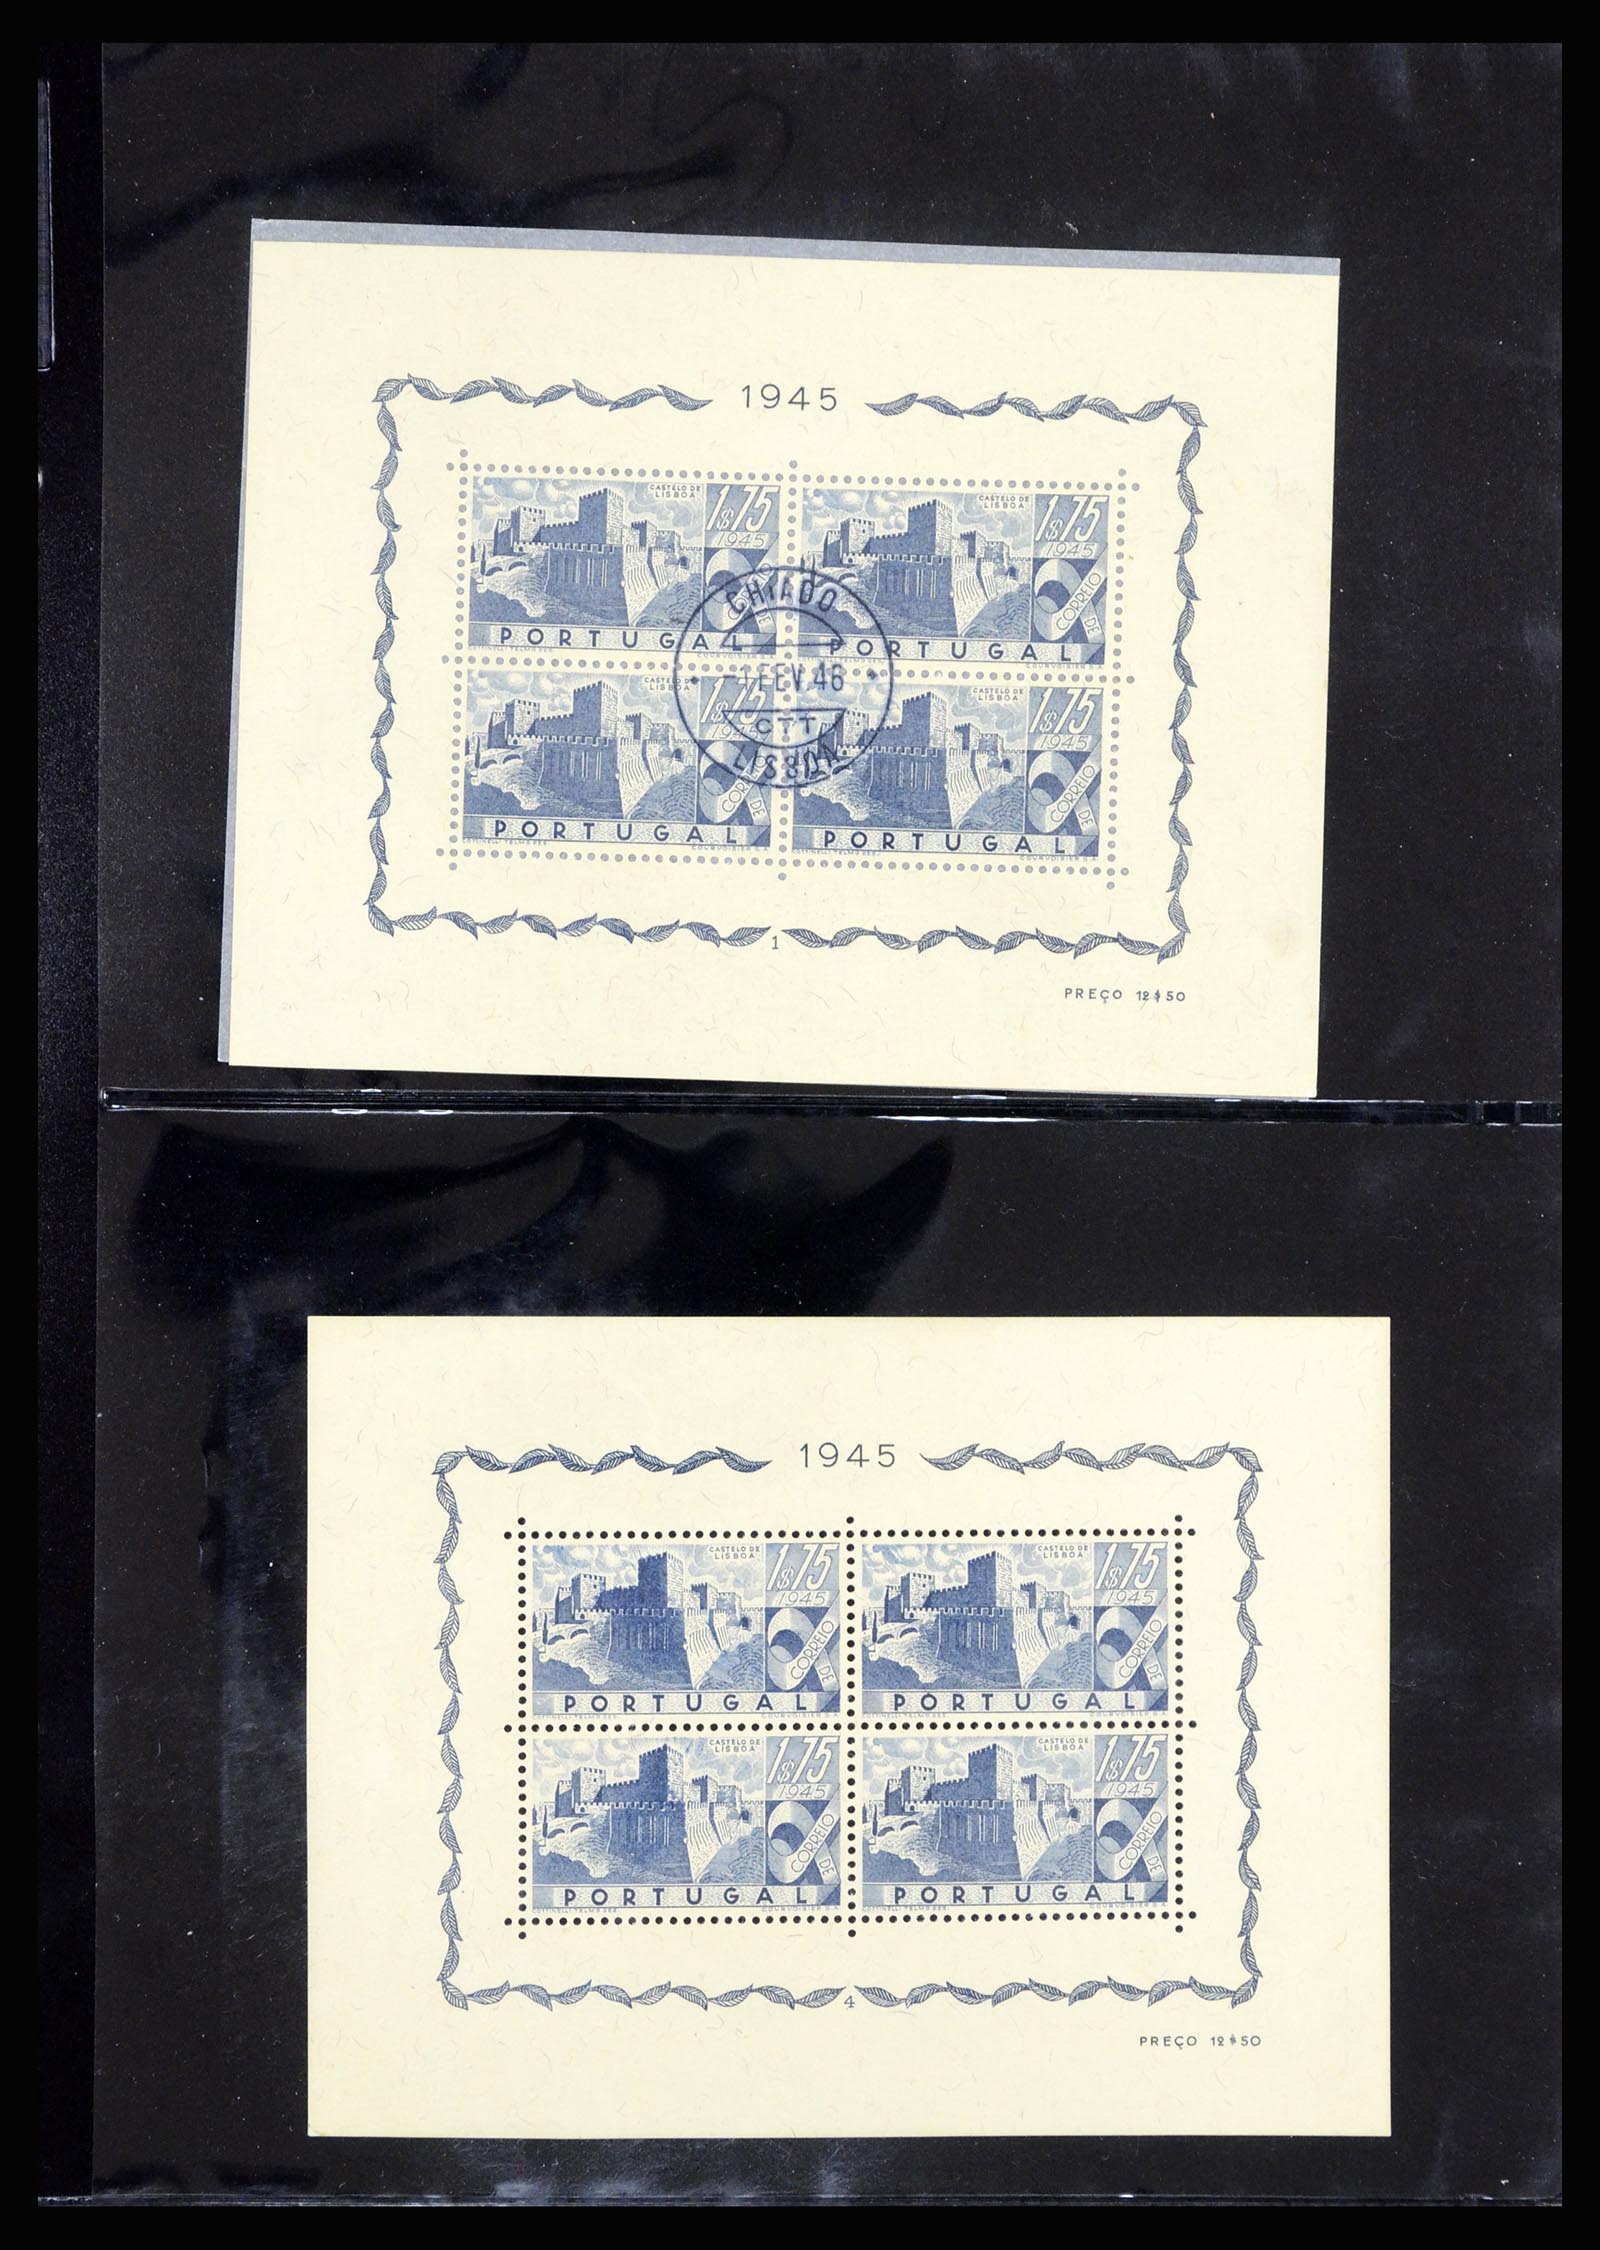 36924 003 - Stamp collection 36924 Portugal souvenir sheets 1940-1949.